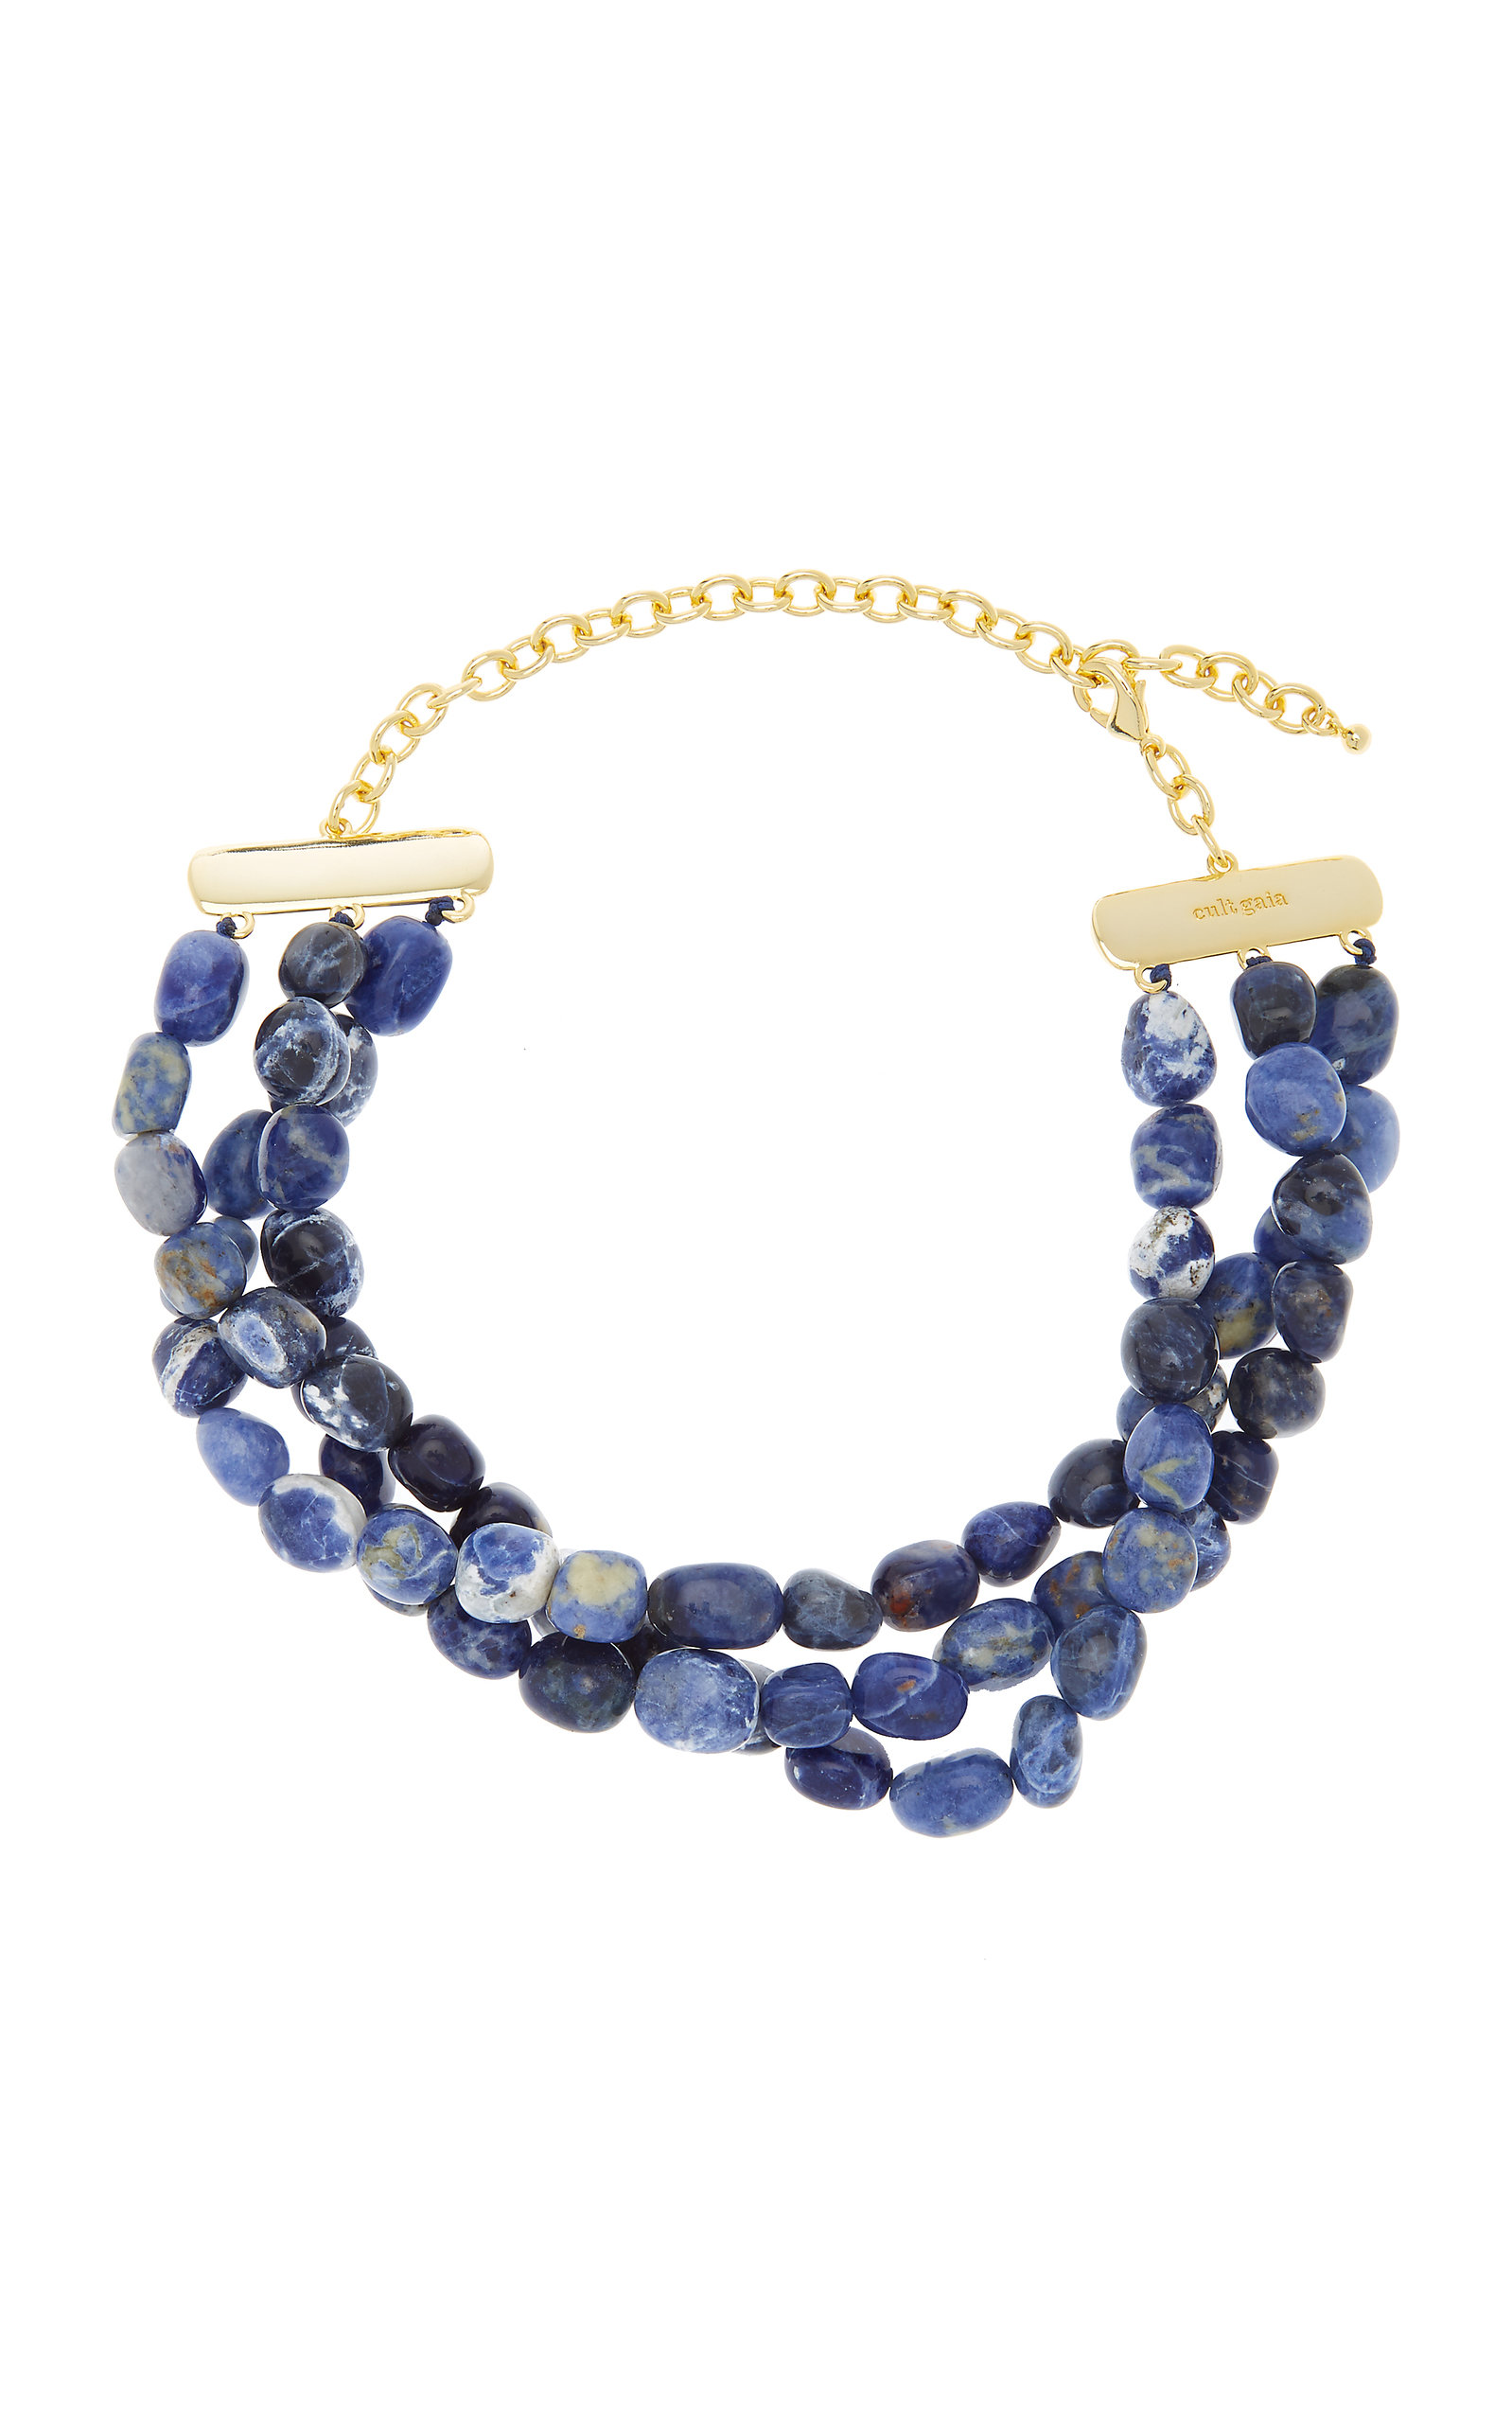 Cult Gaia - Women's Nora Sodalite Necklace - Blue - OS - Moda Operandi - Gifts For Her